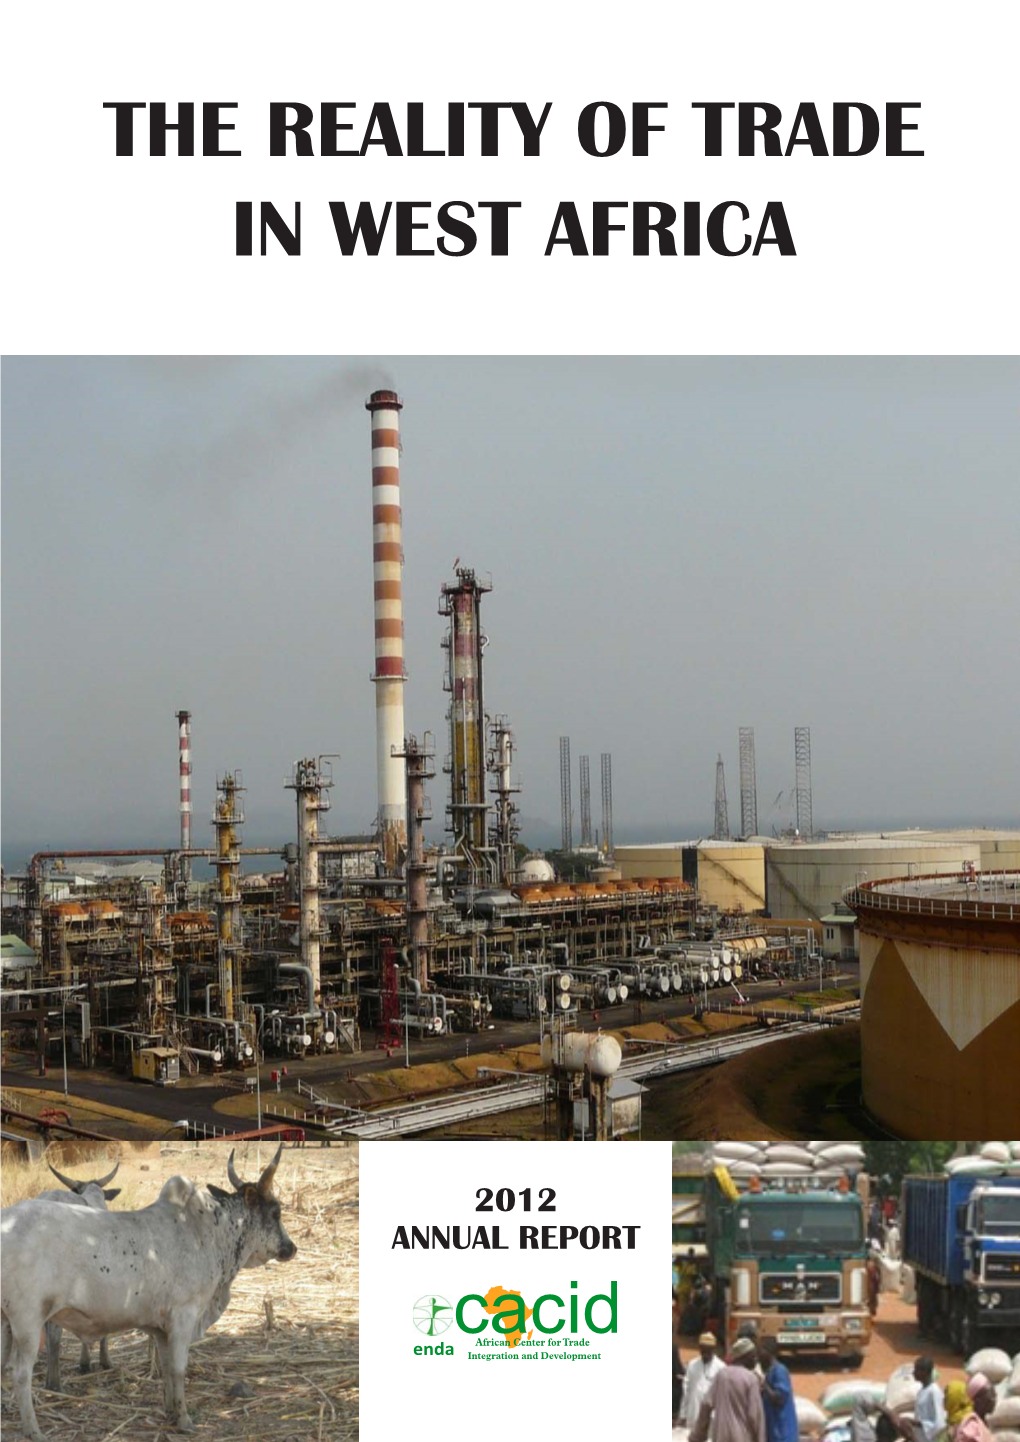 The Reality of Trade in West Africa